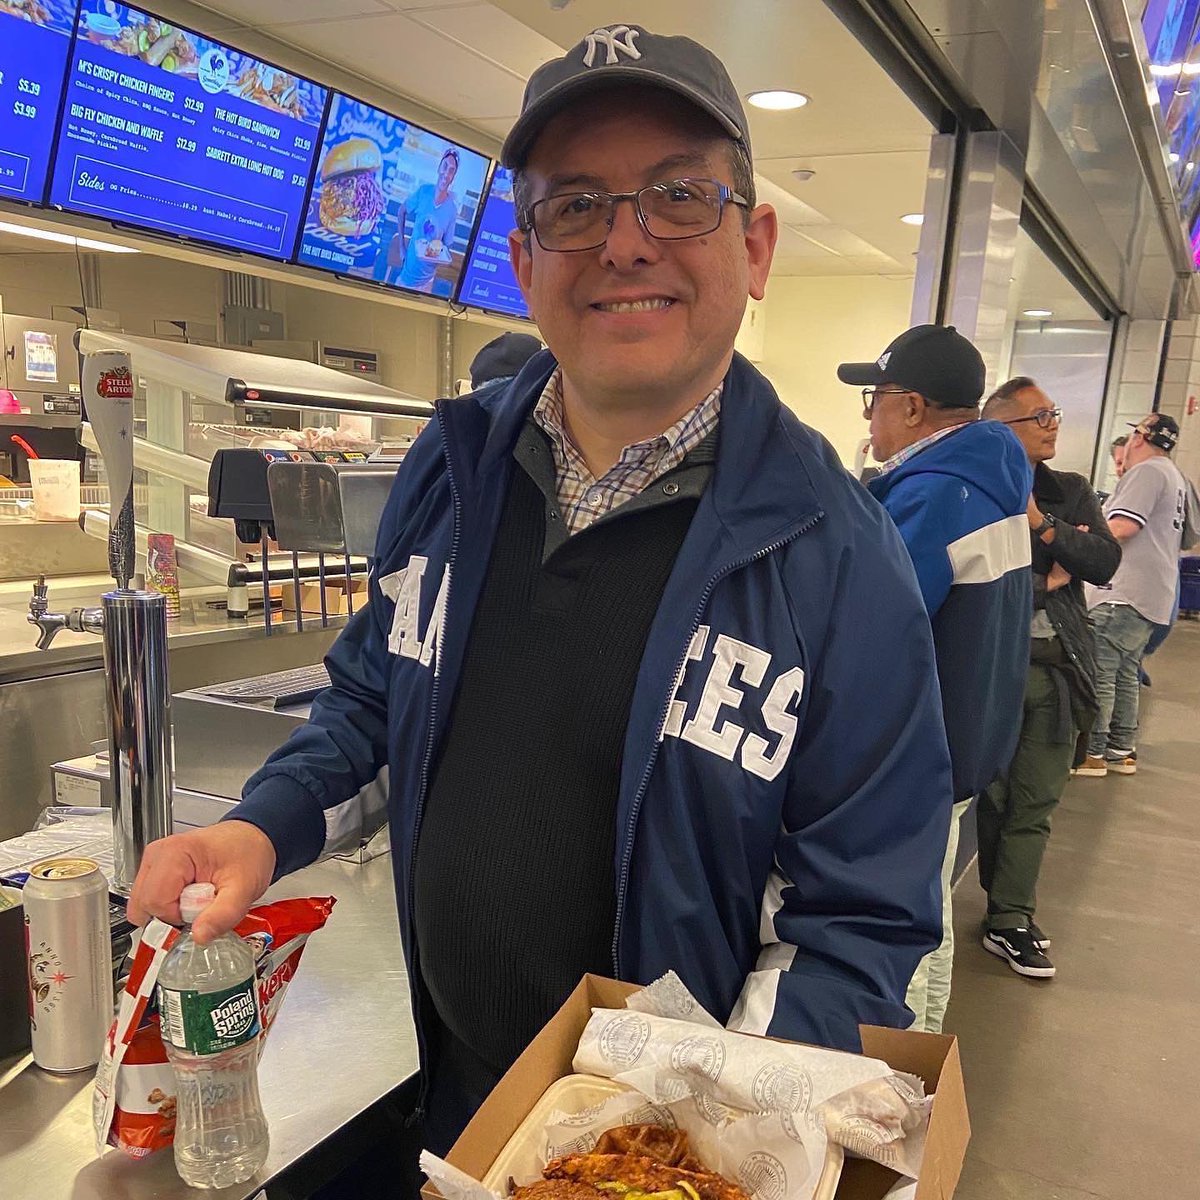 Be like these fans, and start this homestand off right with our Streetbird classics. Meet us at Section 112 and try our Hot bird sandwich & Big Fly chicken and waffle. #streetbirdnyc #yankeestadium #chickensandwich #chickenandwaffles #yankees